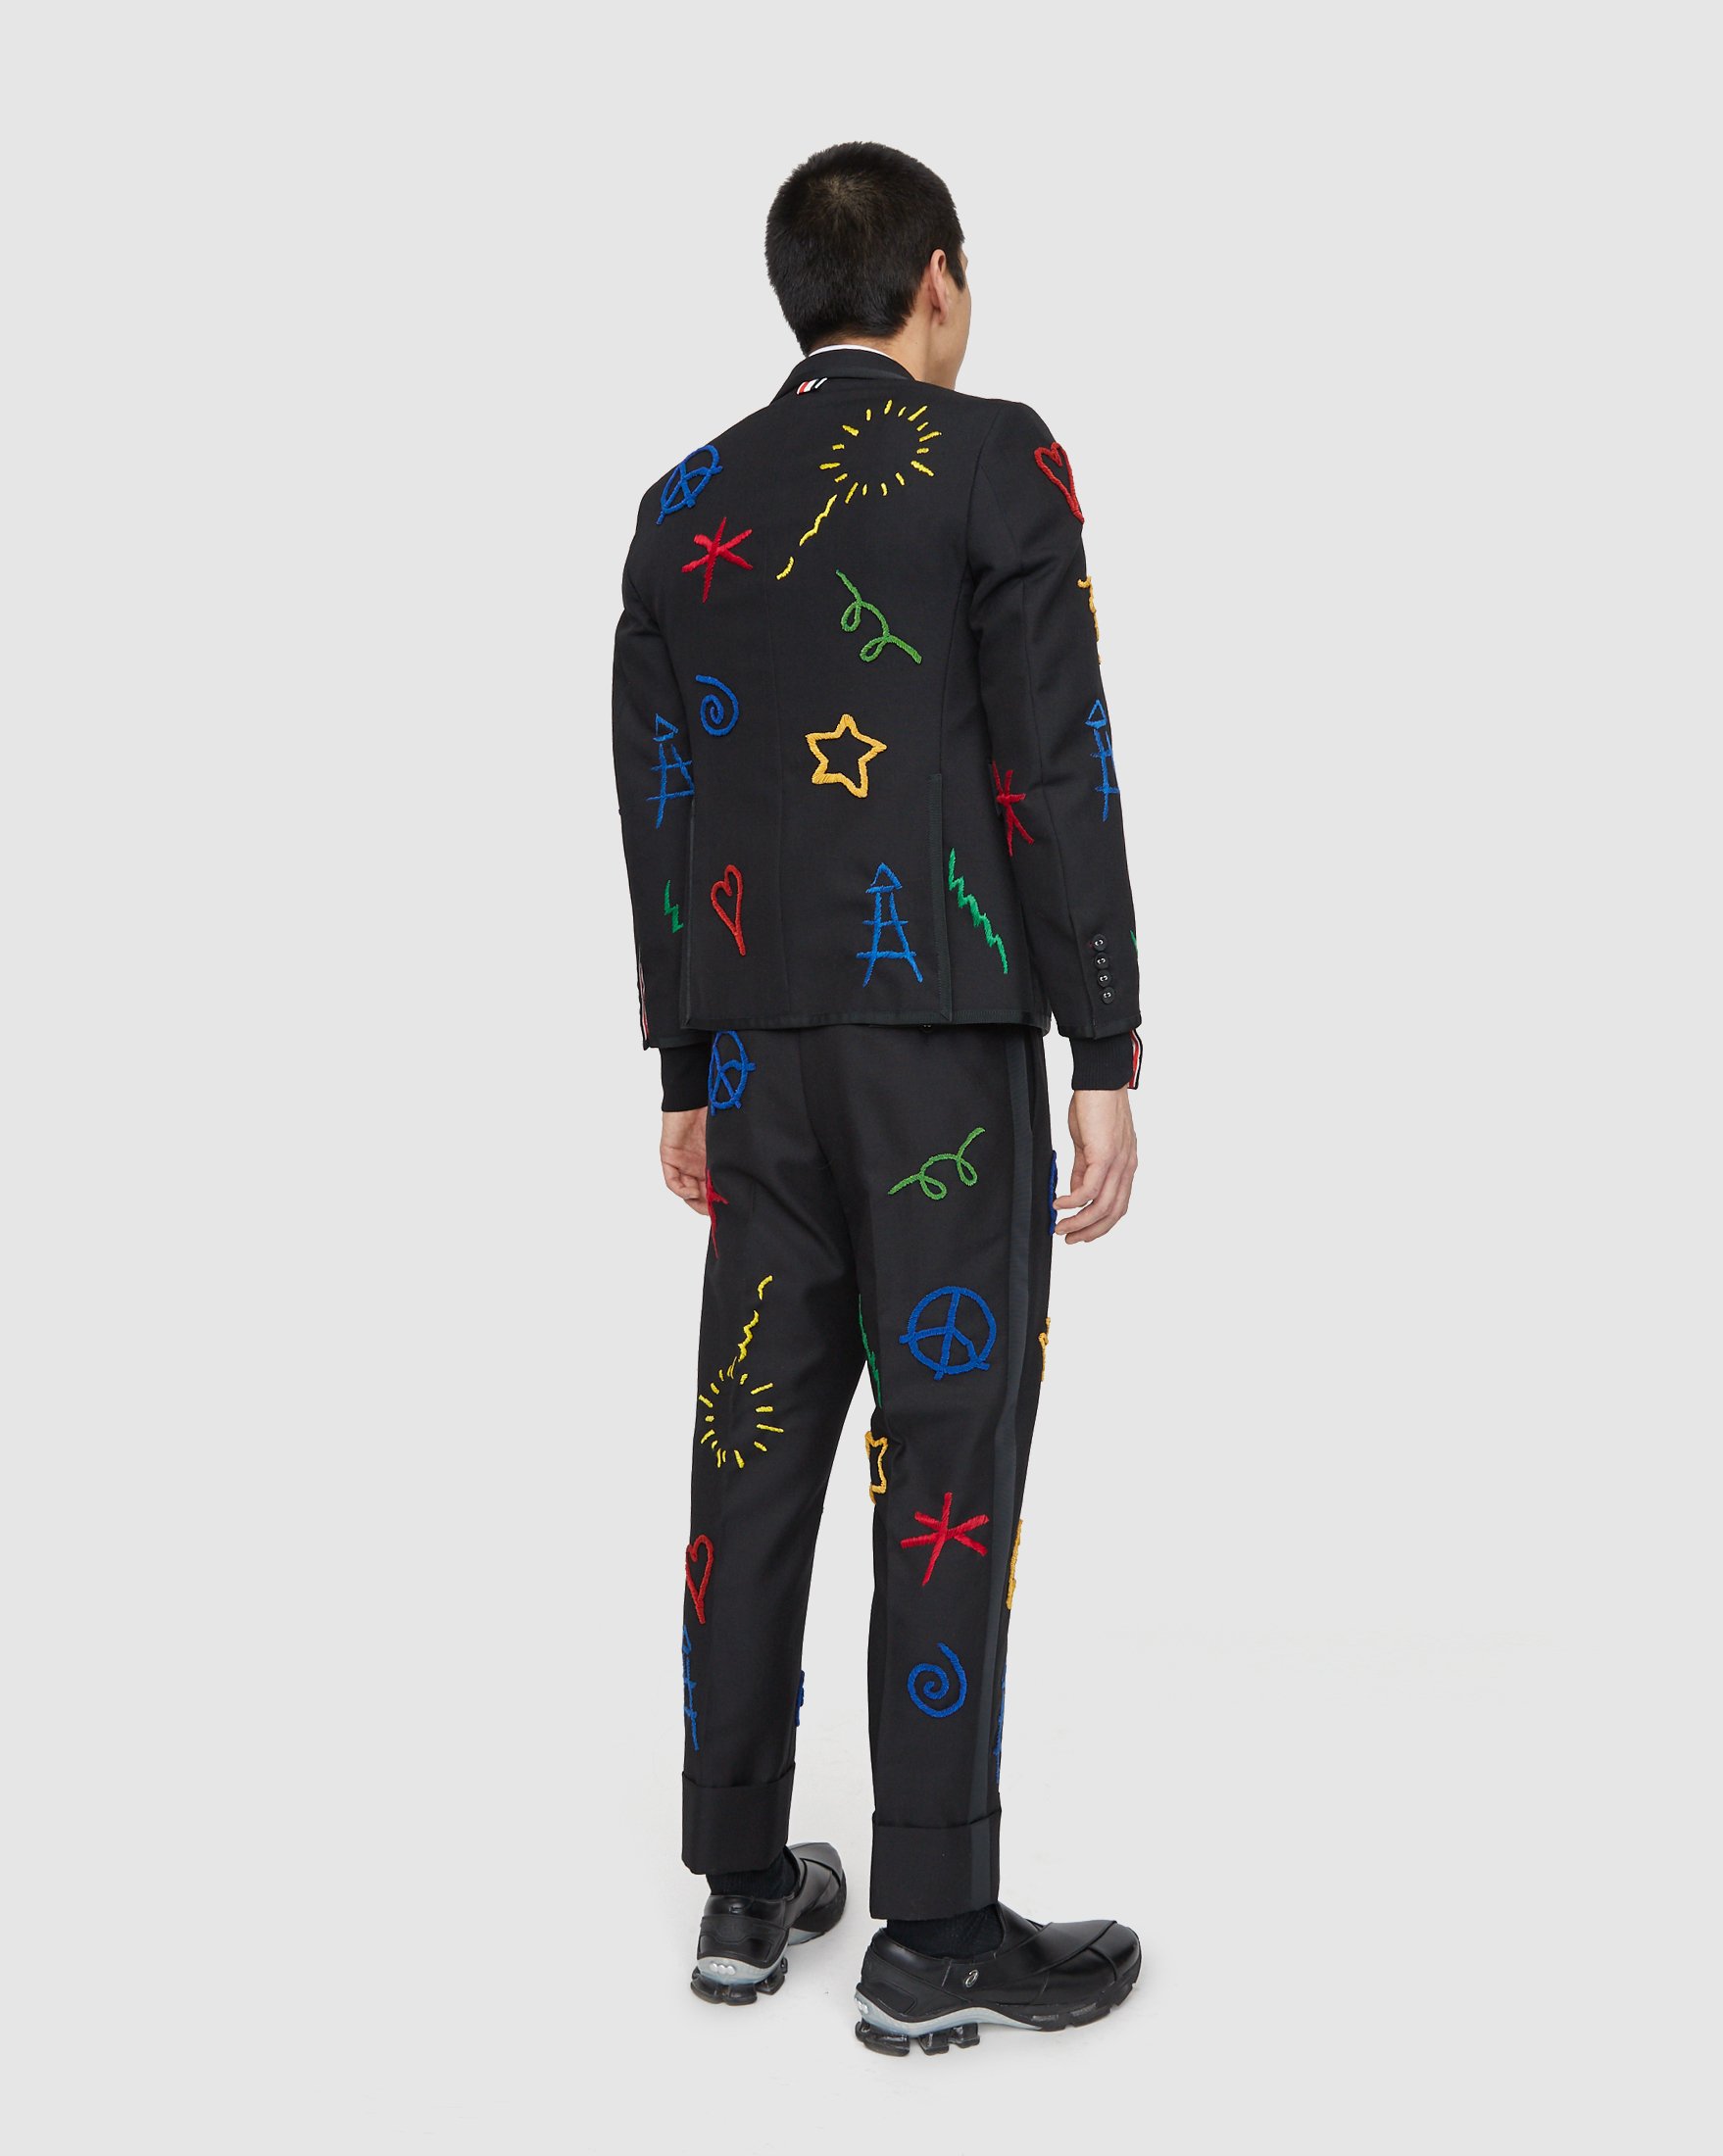 Colette Mon Amour x Thom Browne - Black Embroidered Tux Suit - Clothing - Grey - Image 10